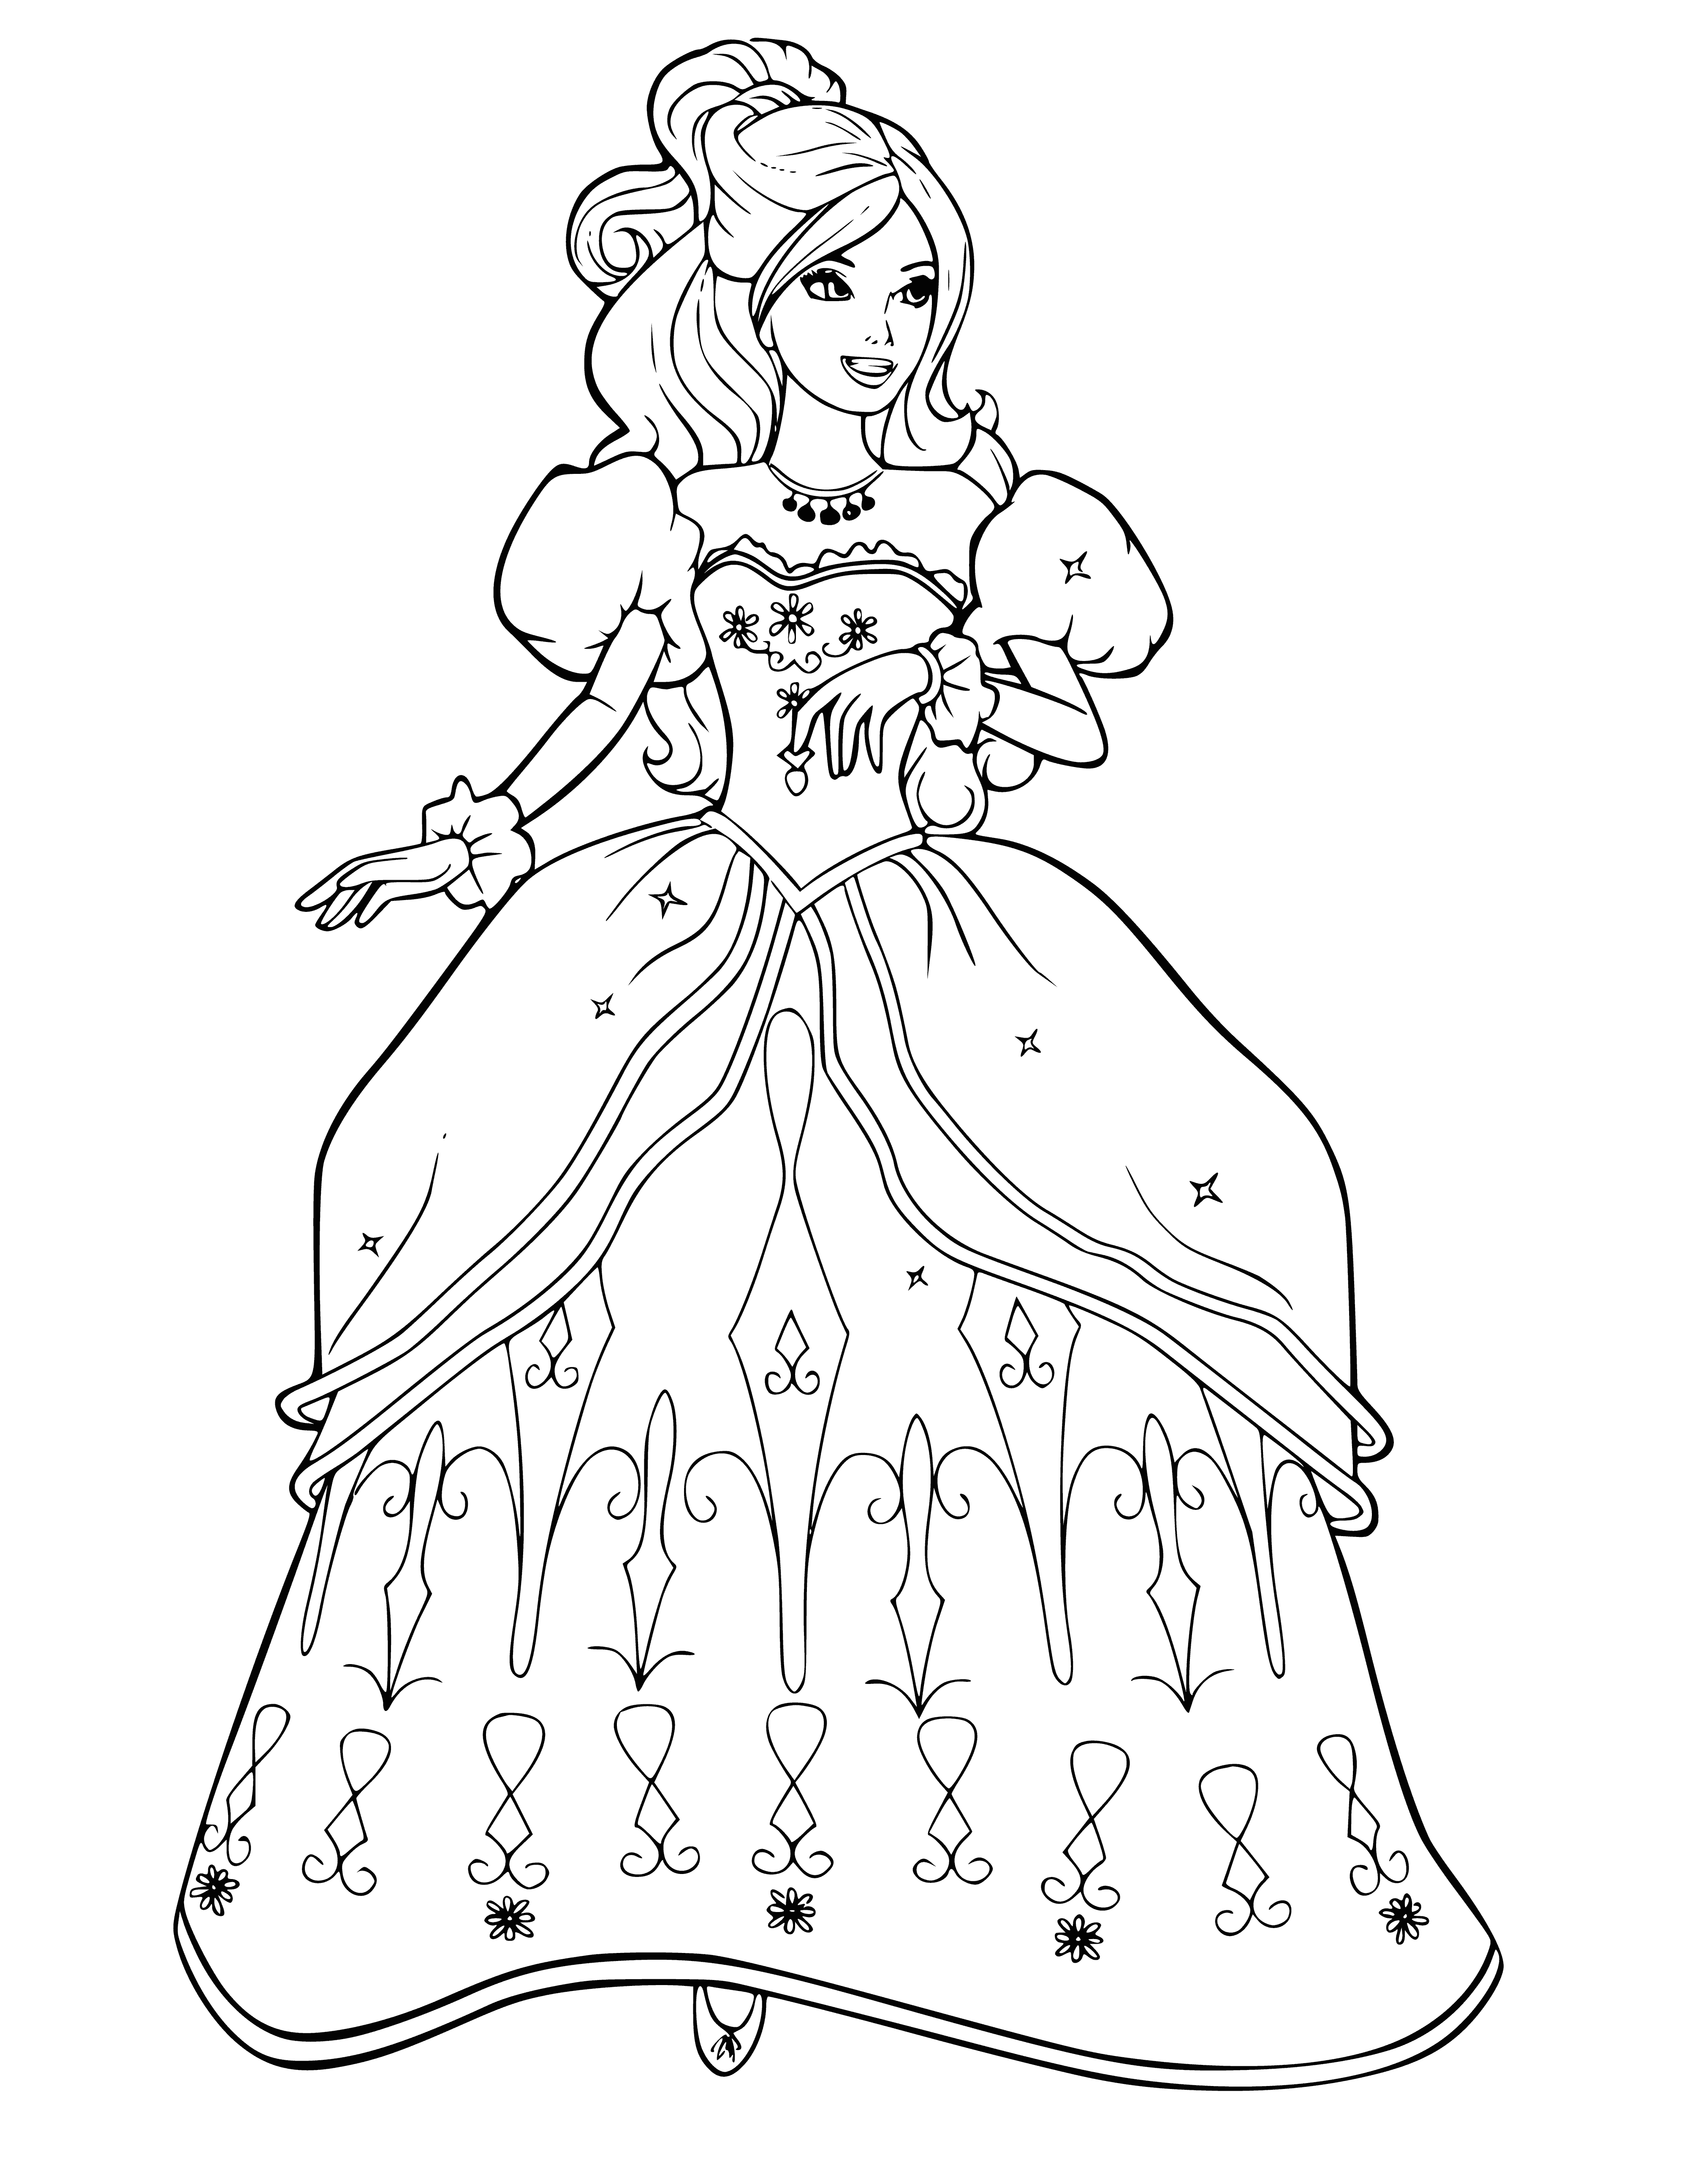 coloring page: Barbie sports a white dress w/ light purple & pink accents, bare arms & shoulders, cascading fabric, purple ribbon, statement necklace & pink shoes.